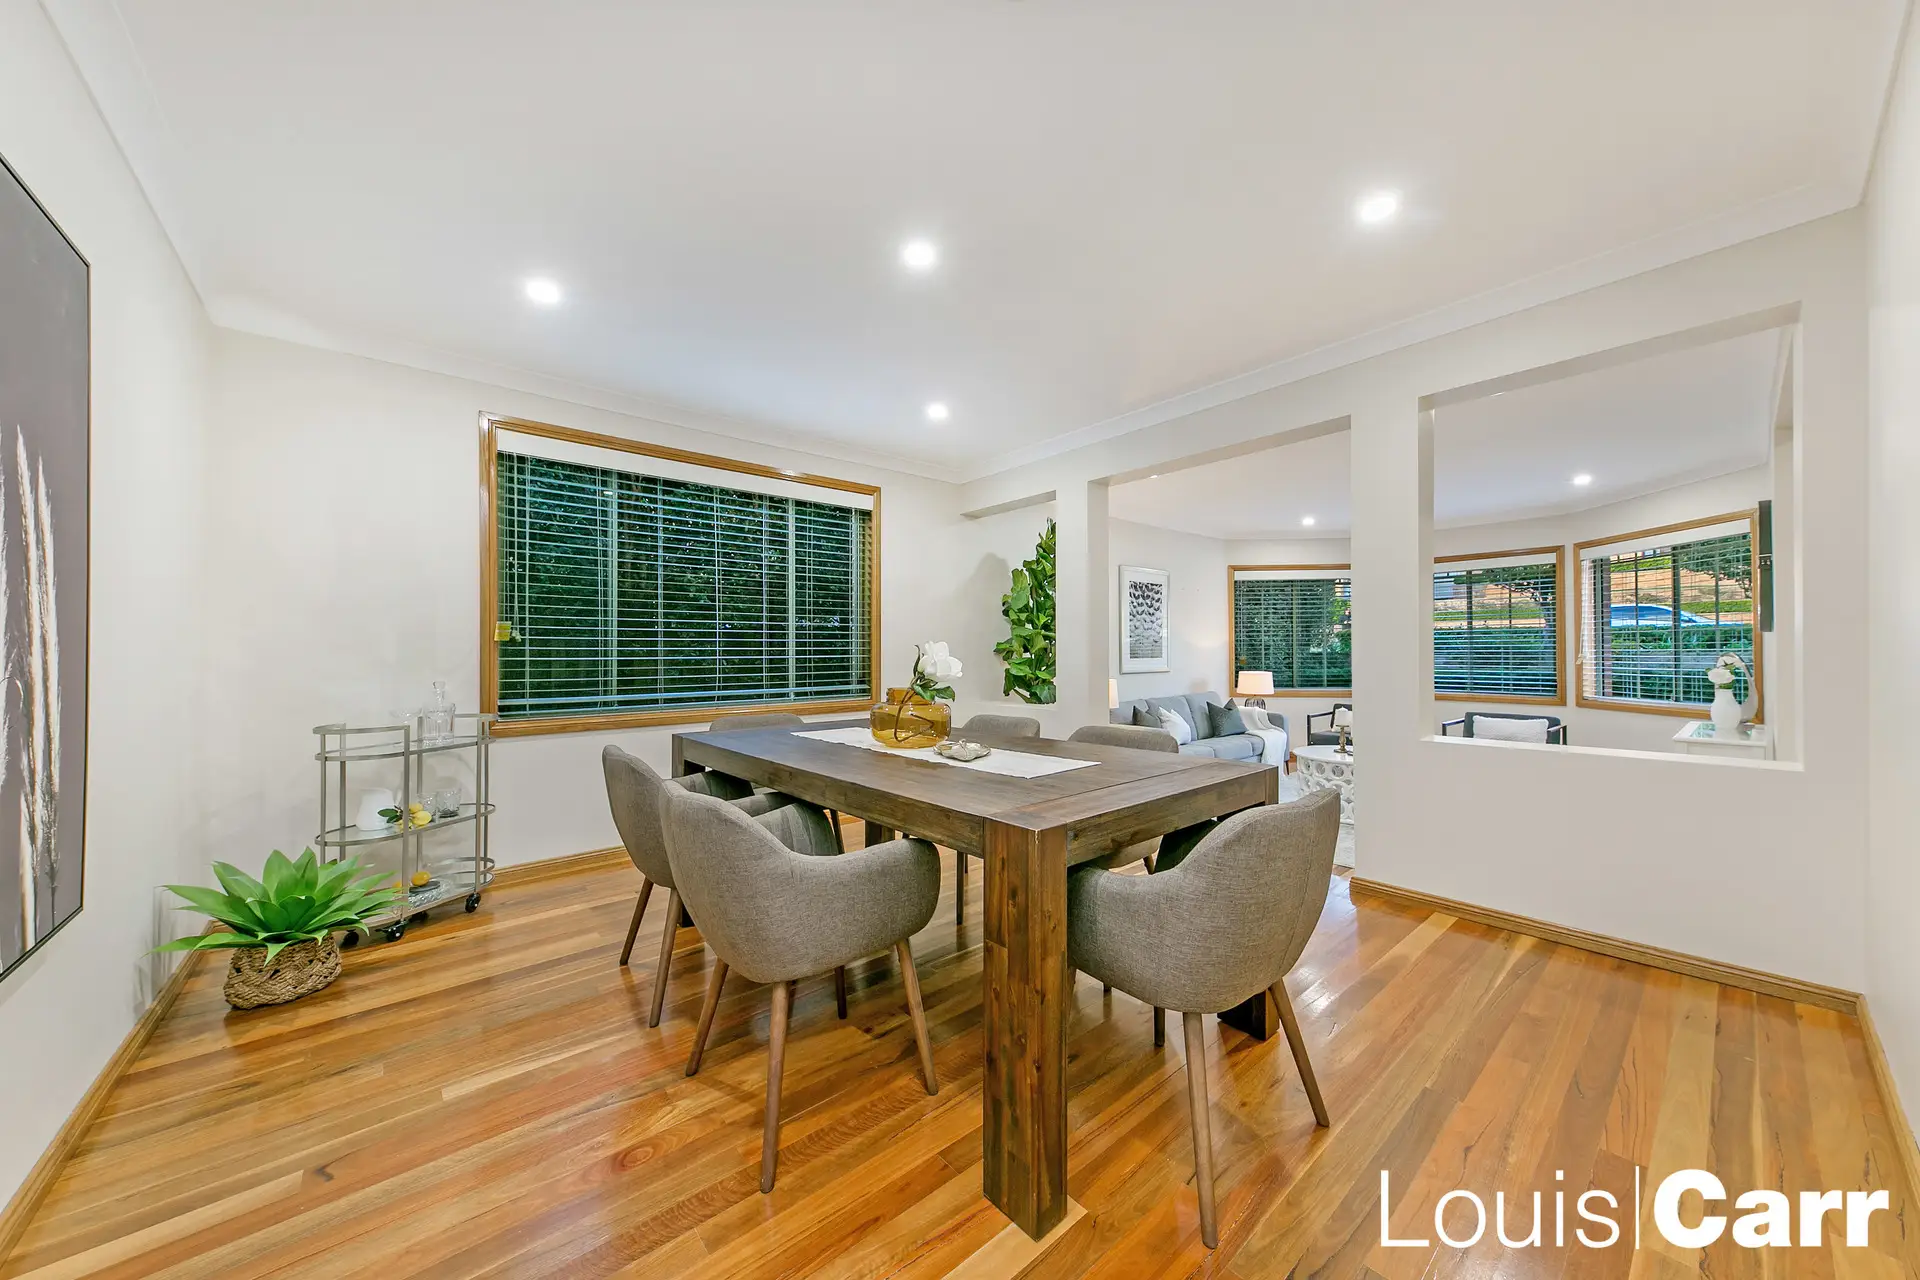 Photo #4: 44 Perisher Road, Beaumont Hills - Sold by Louis Carr Real Estate